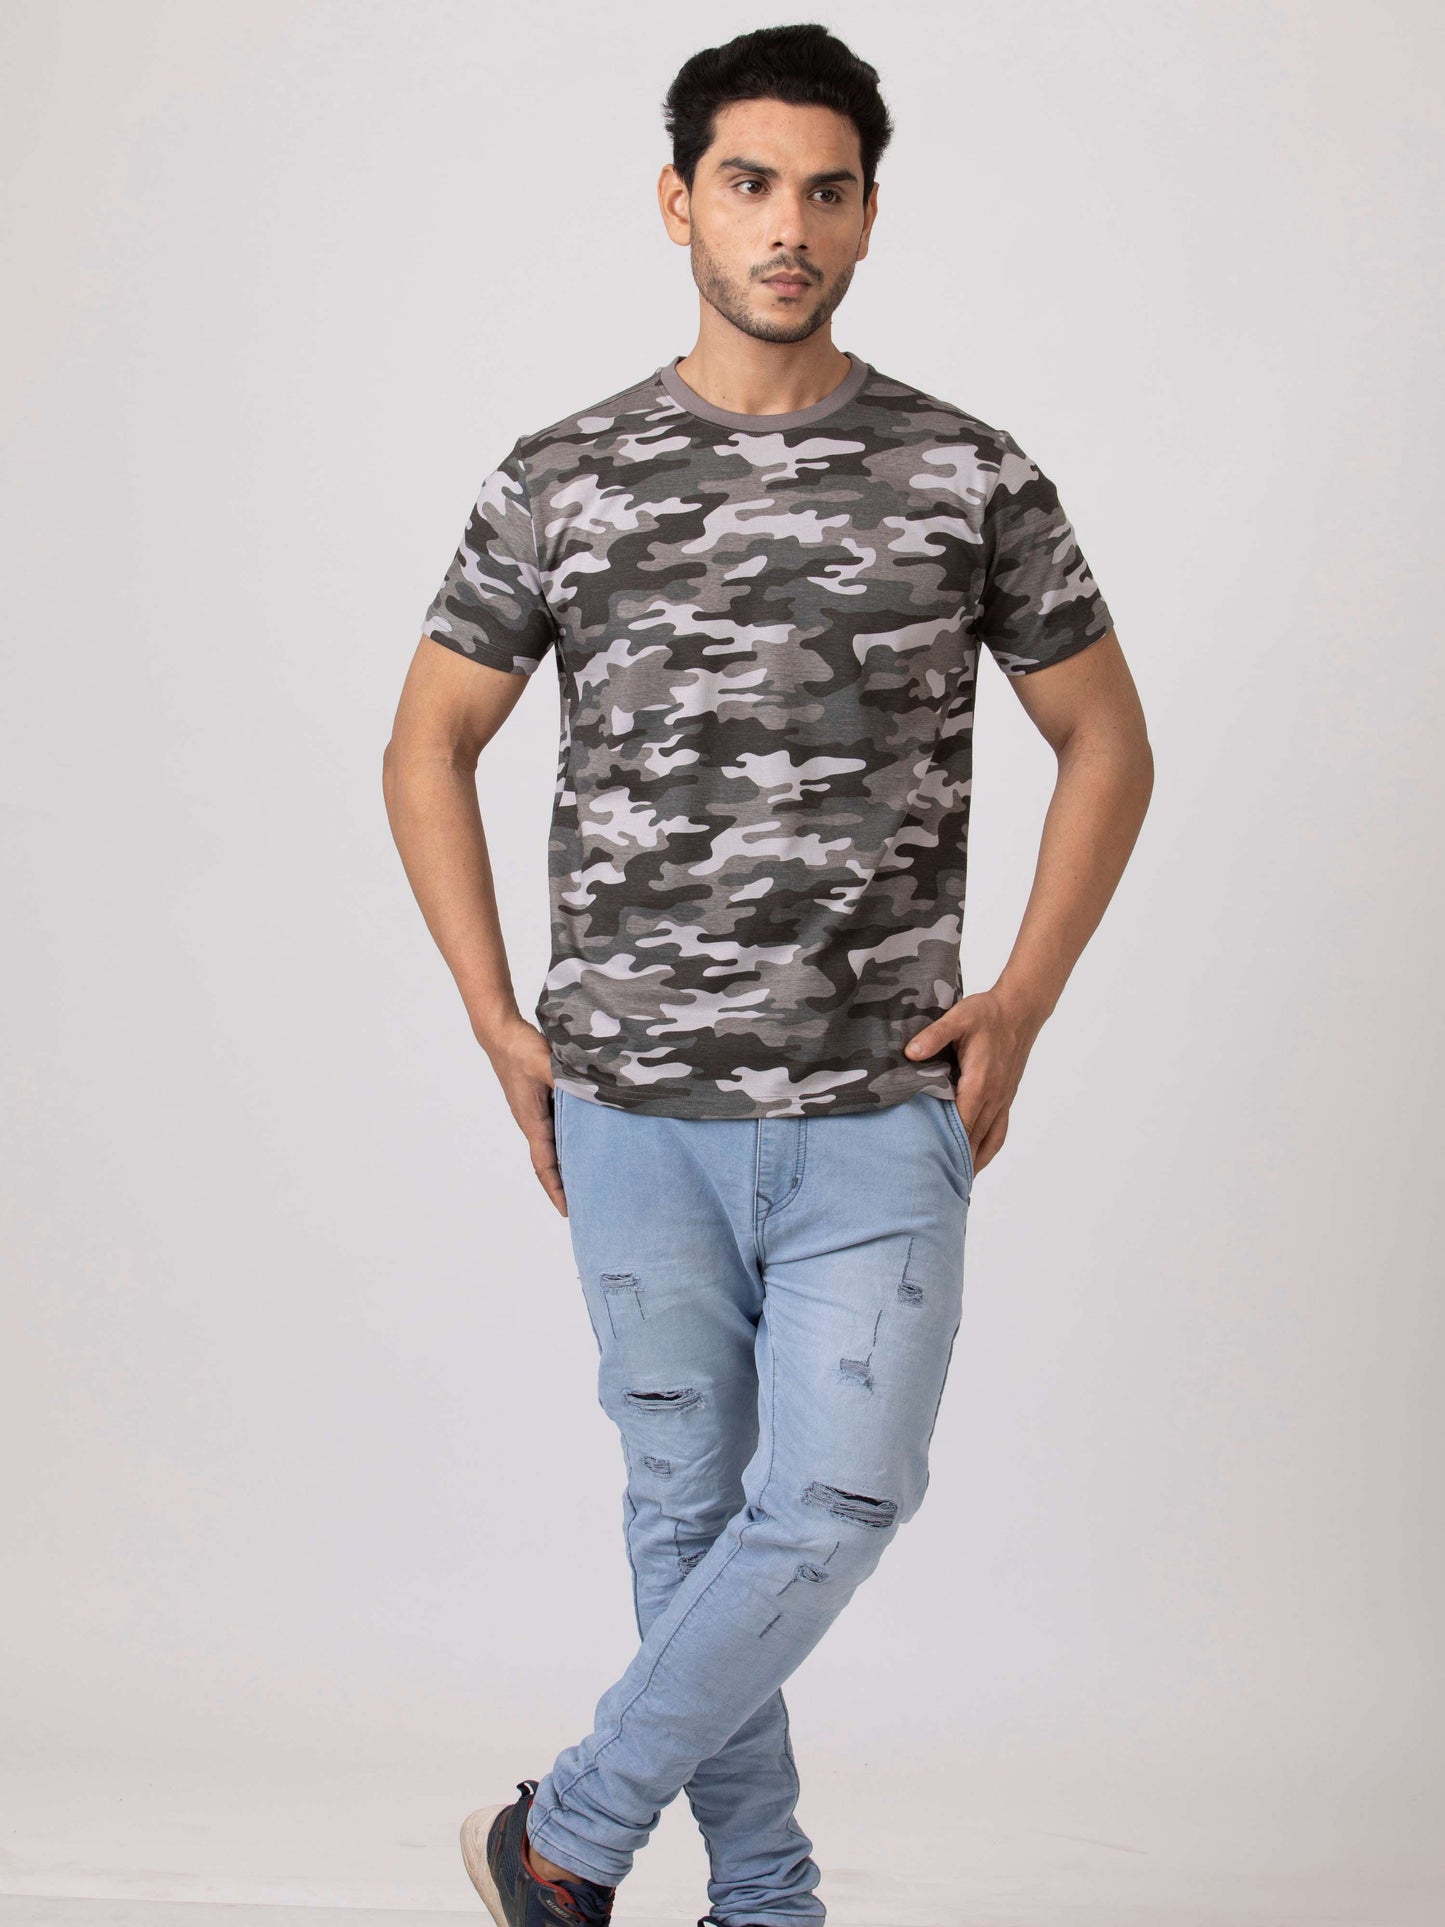 Stealthy Military Camouflage  Men's Cotton round neck T-Shirt